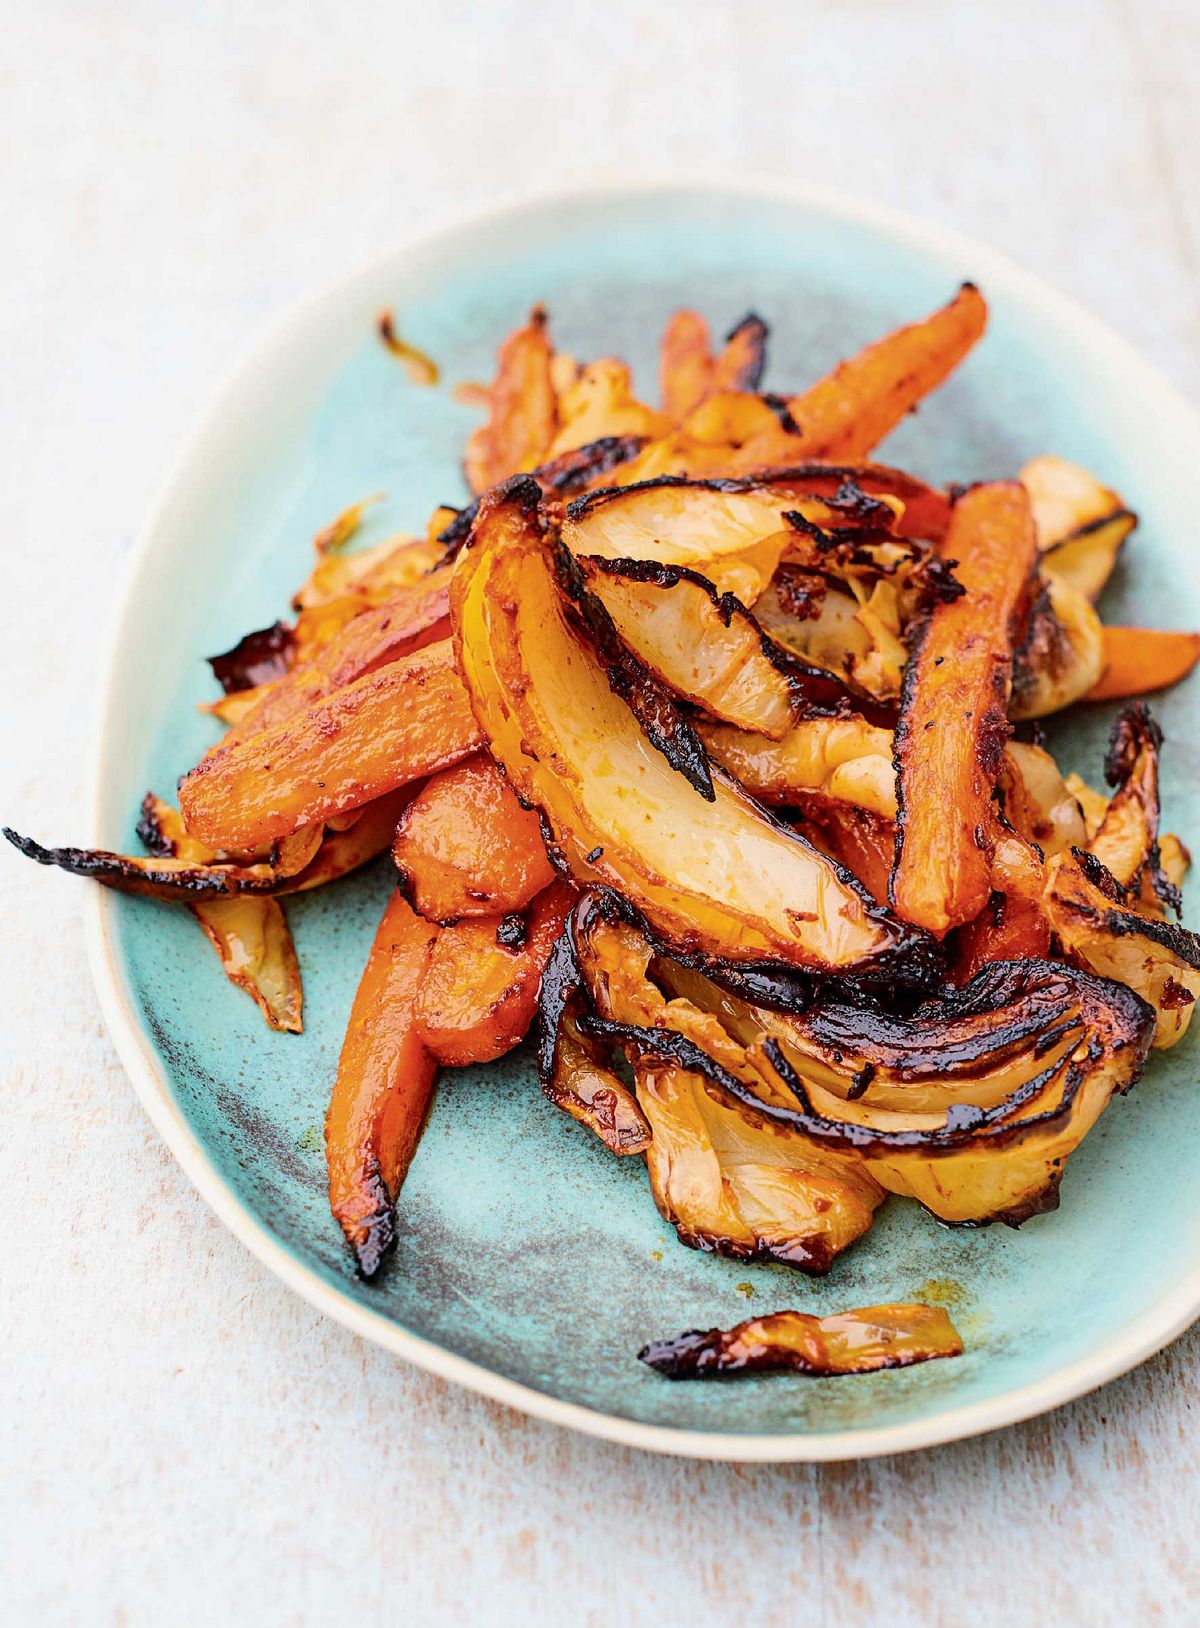 Meera Sodha’s Roasted Carrot and Cabbage with Gochujang